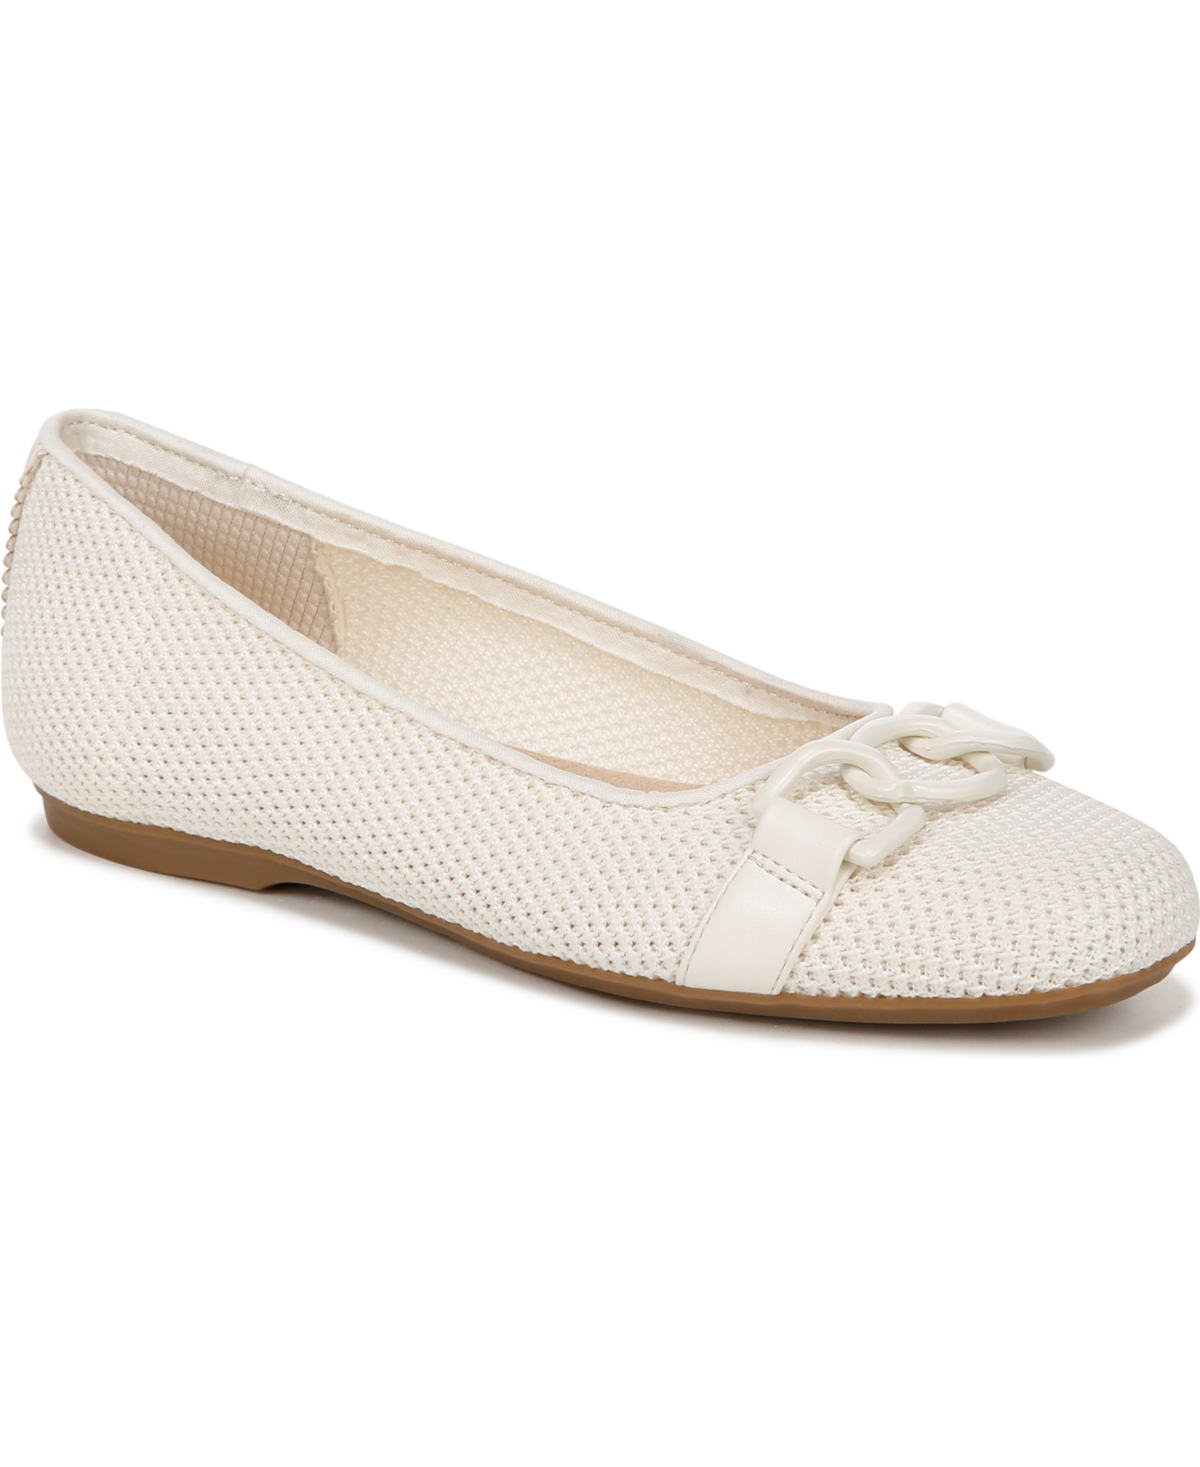 Women's Wexley Adorn Flats - Off/White Knit Fabric/Faux Leather